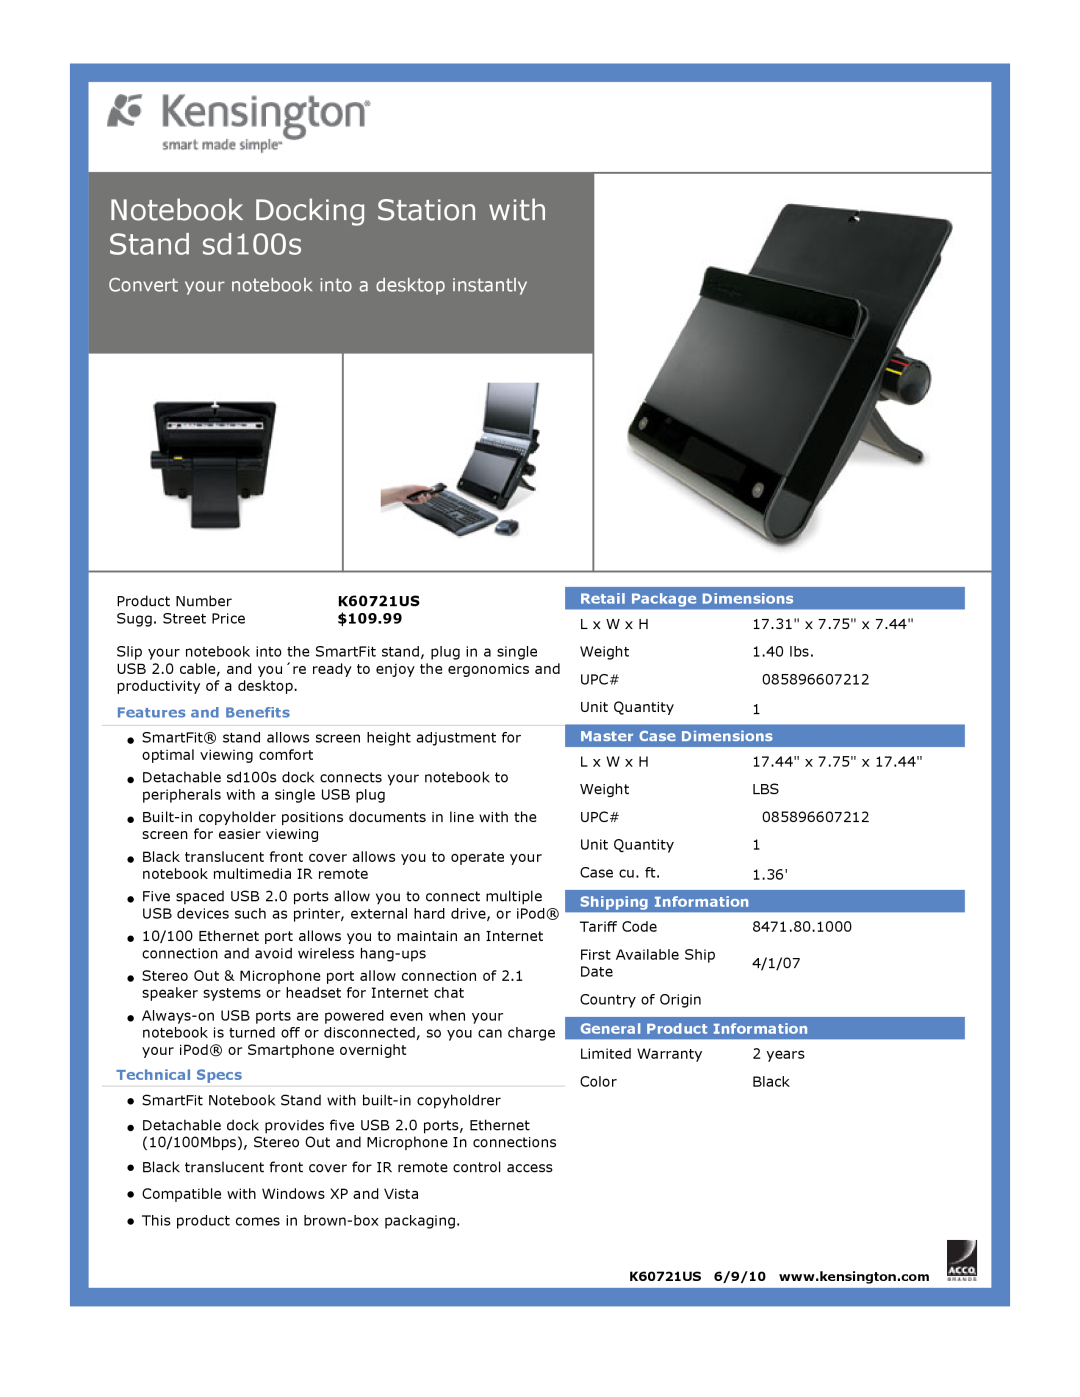 Kensington EU64325 Notebook Docking Station with Stand sd100s, Convert your notebook into a desktop instantly, $109.99 